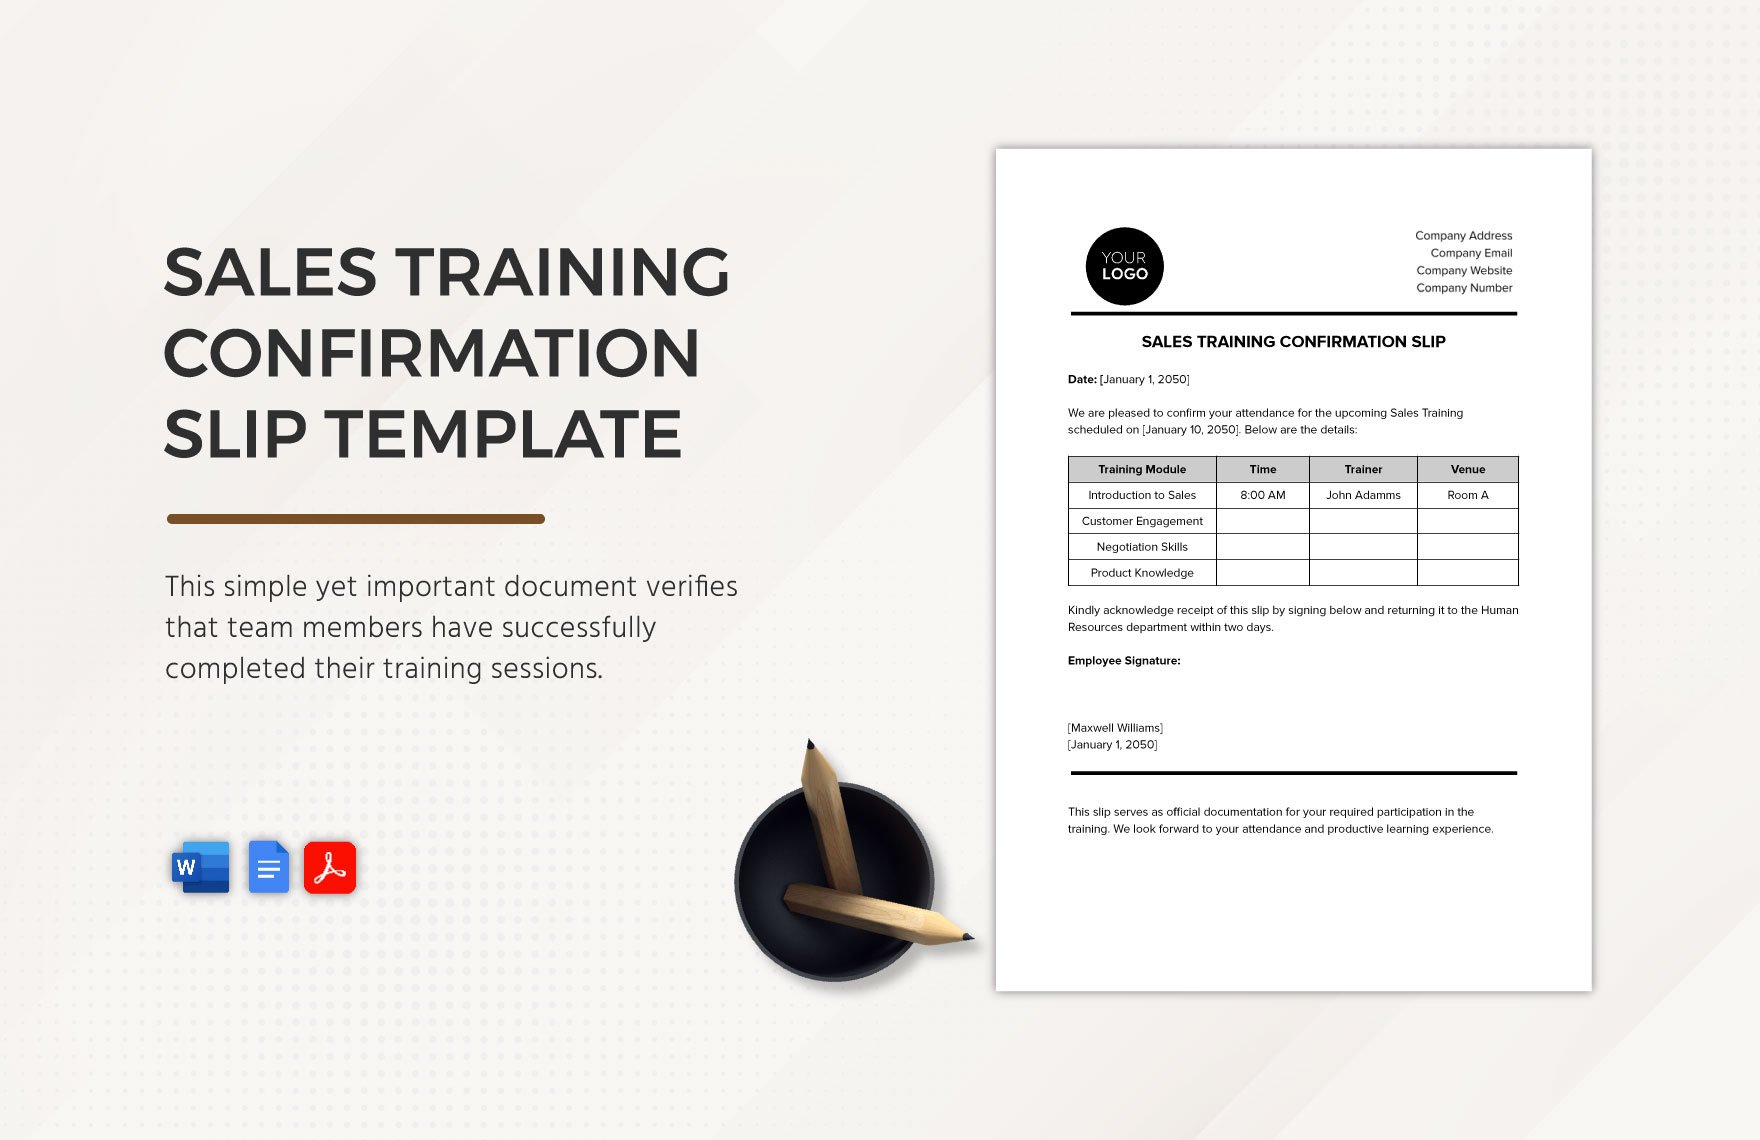 Sales Training Confirmation Slip Template in Word, PDF